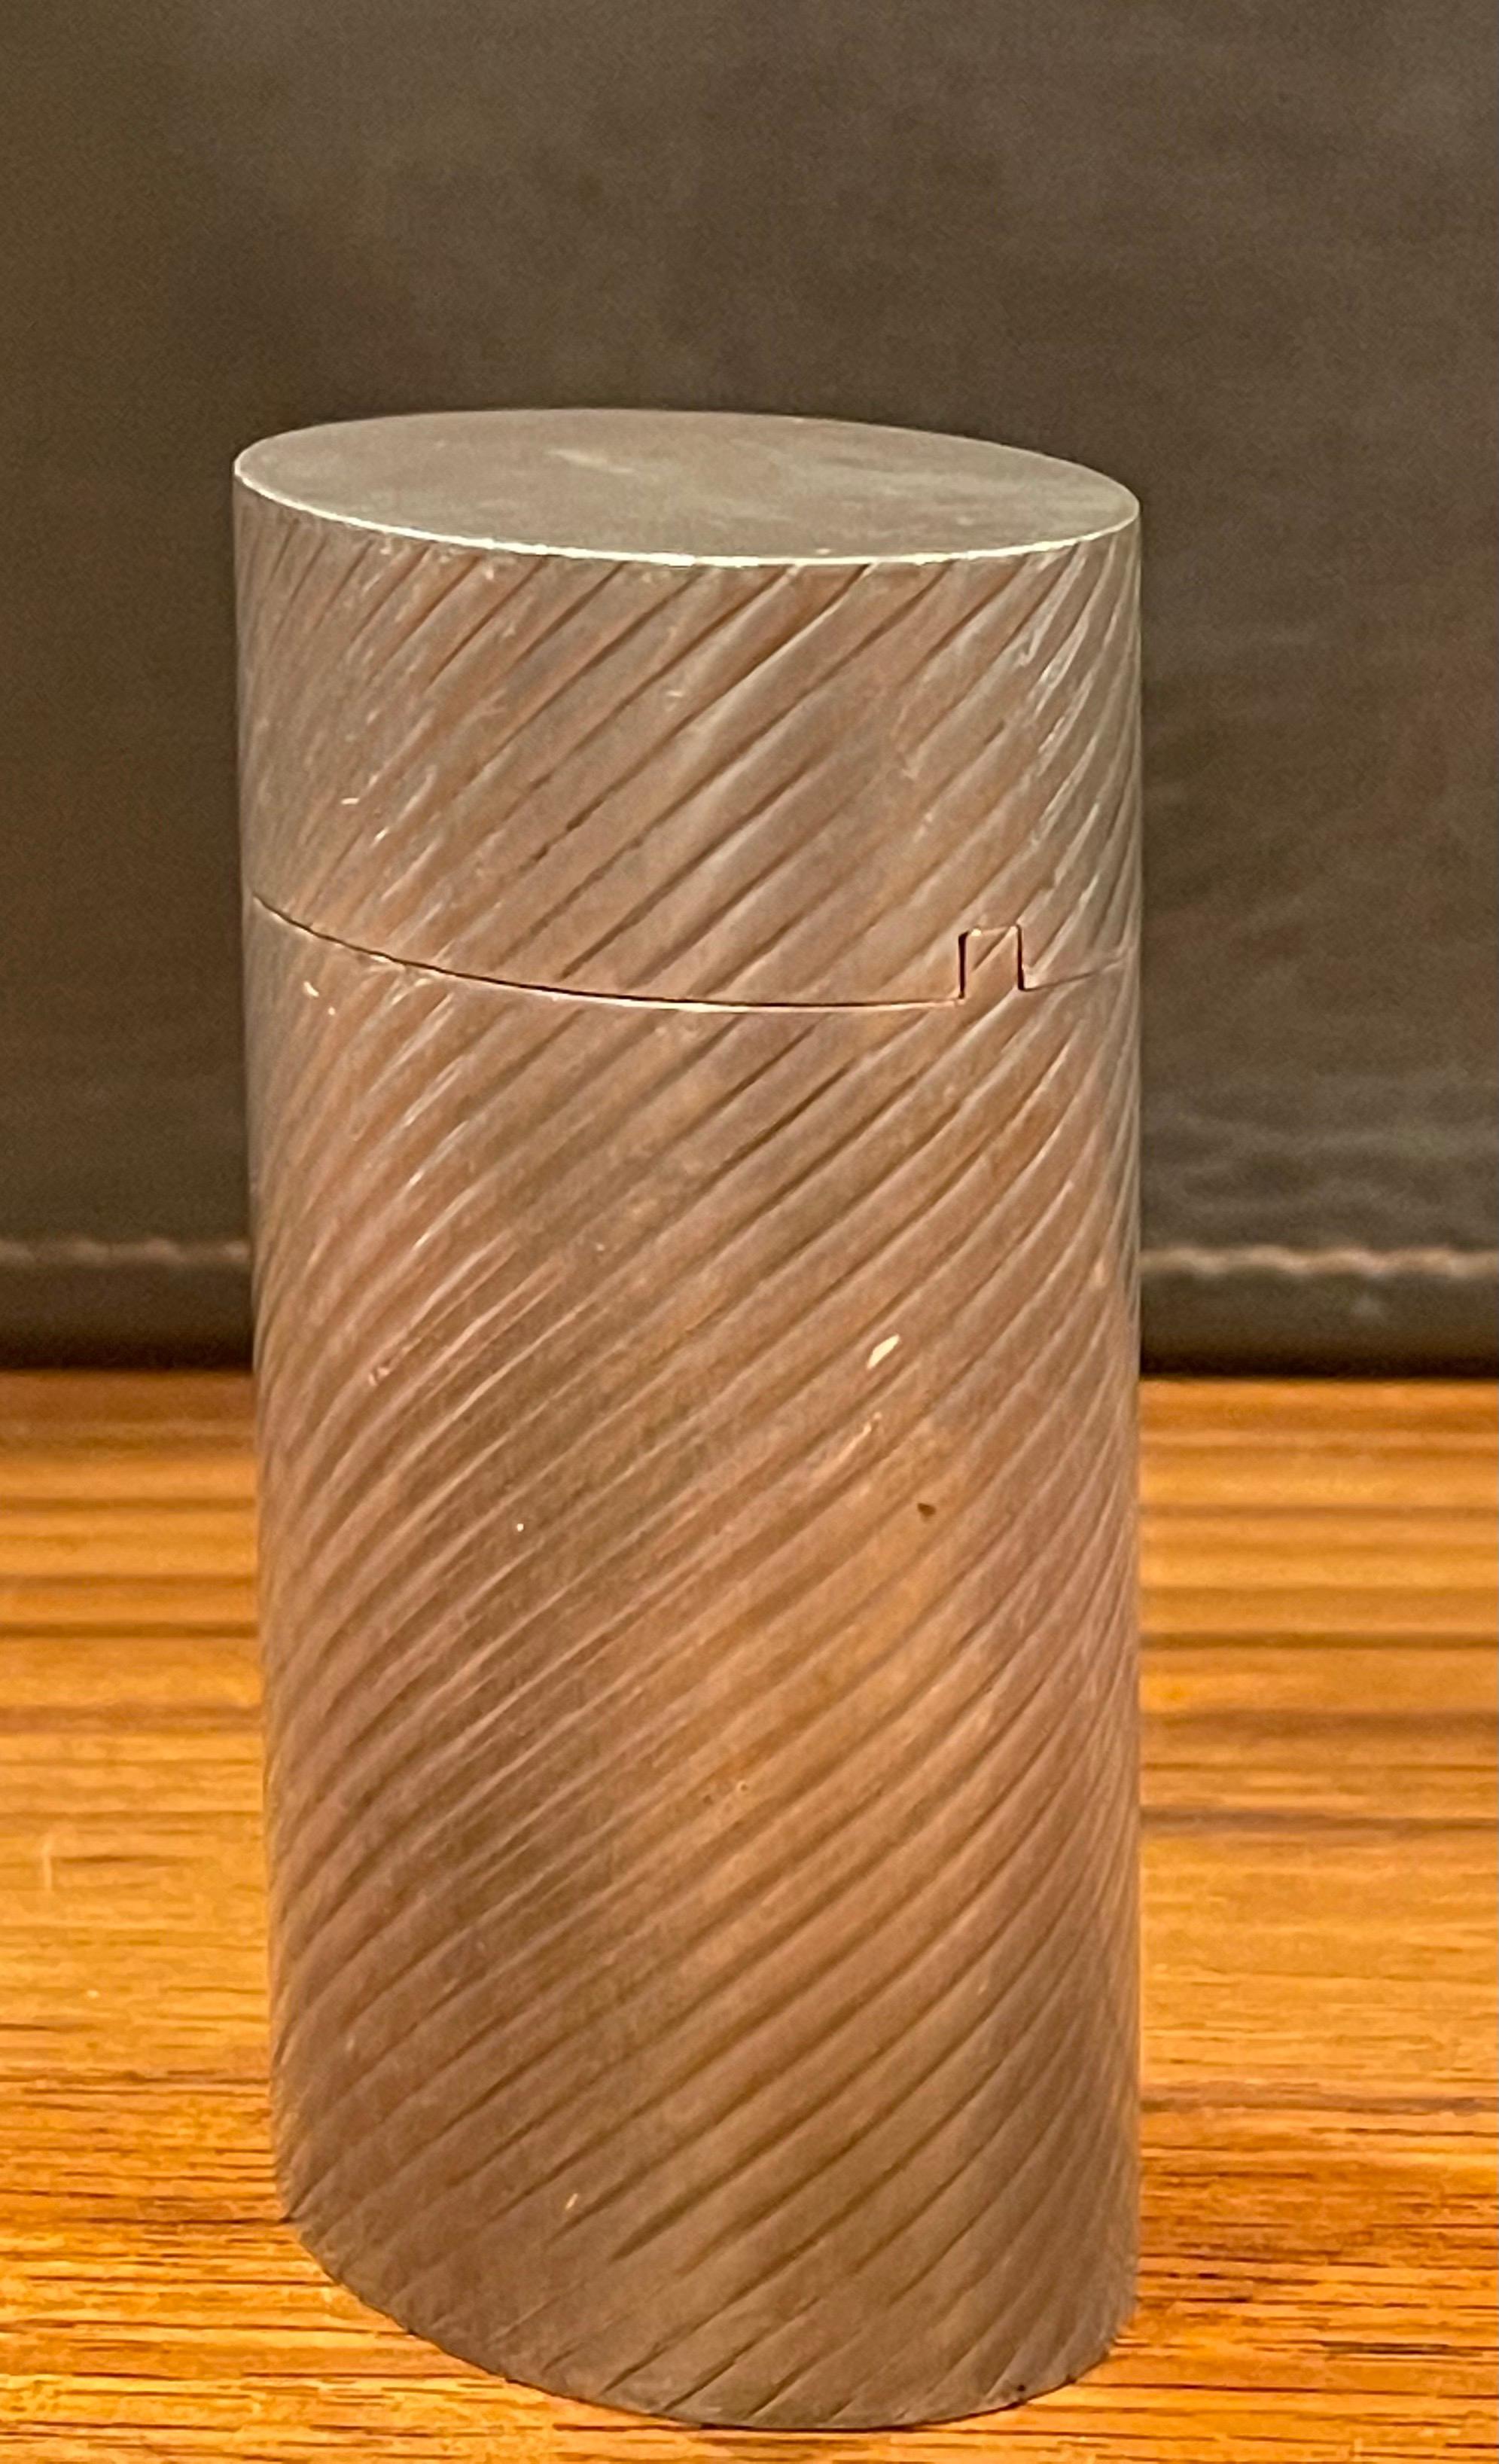 A very rare antique Art Deco sterling silver lidded box by Tiffany & Co., circa 1940s. The piece was mostly likely used for cigarettes or matches, but can be used for trinkets or jewelry. Oval in shape, the box has diagonal lines running the length